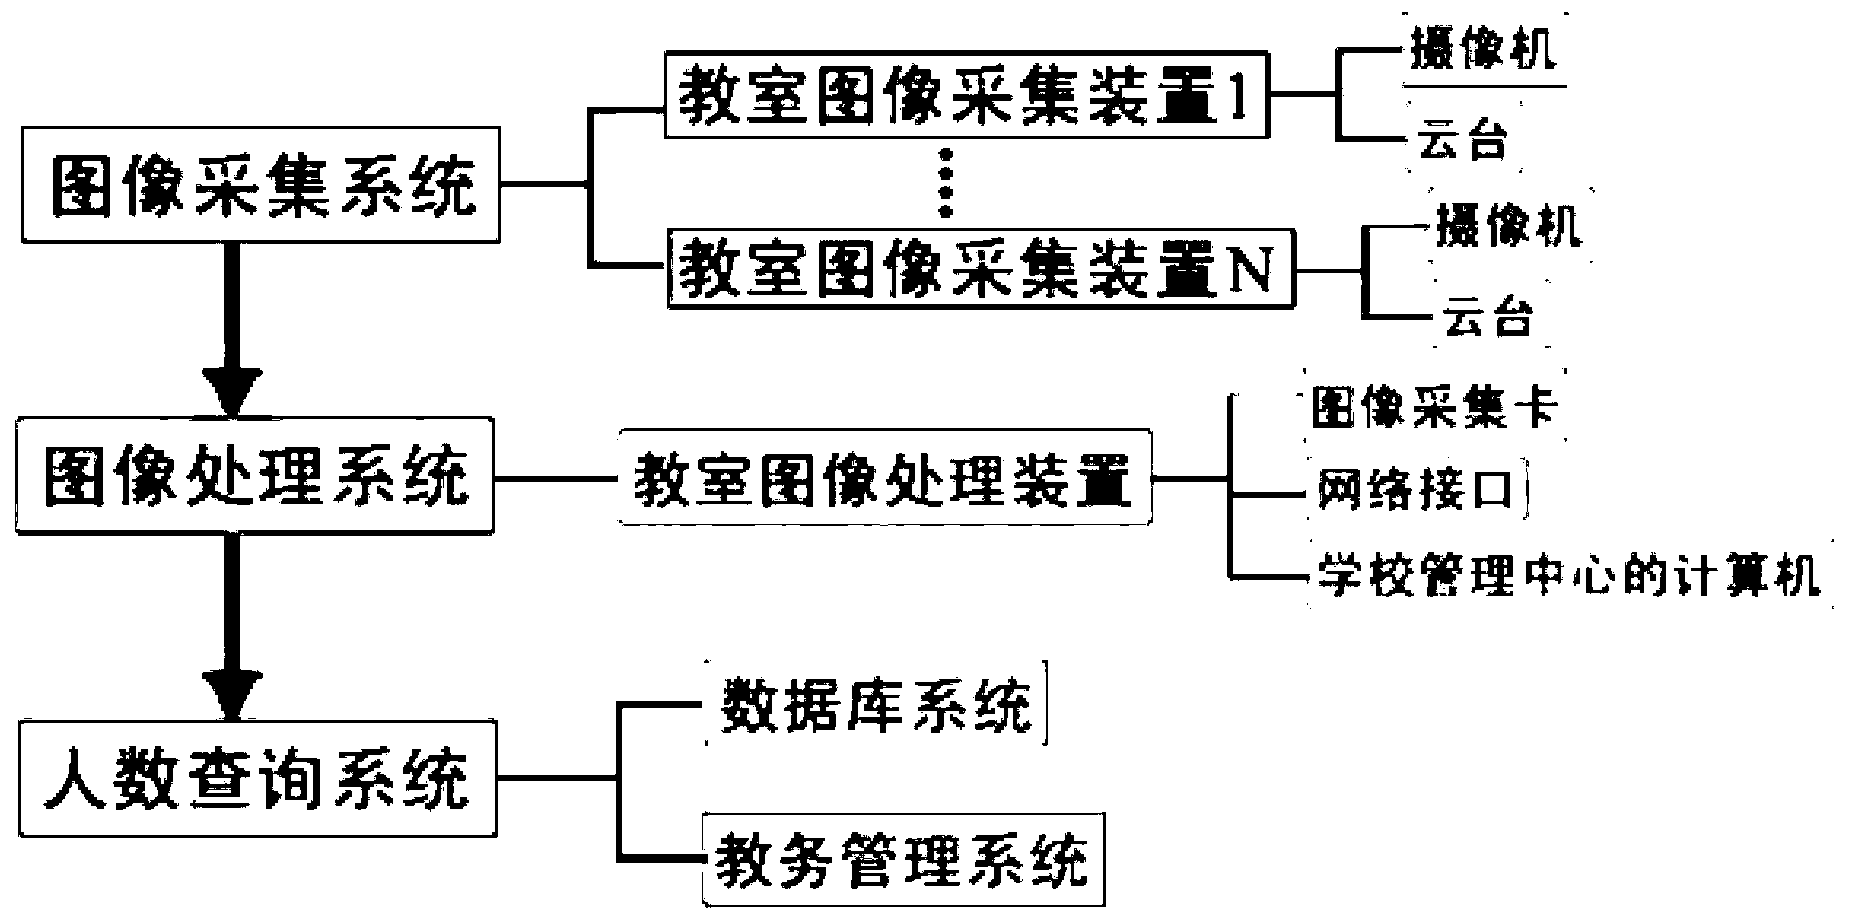 System for counting and inquiring number of classroom persons